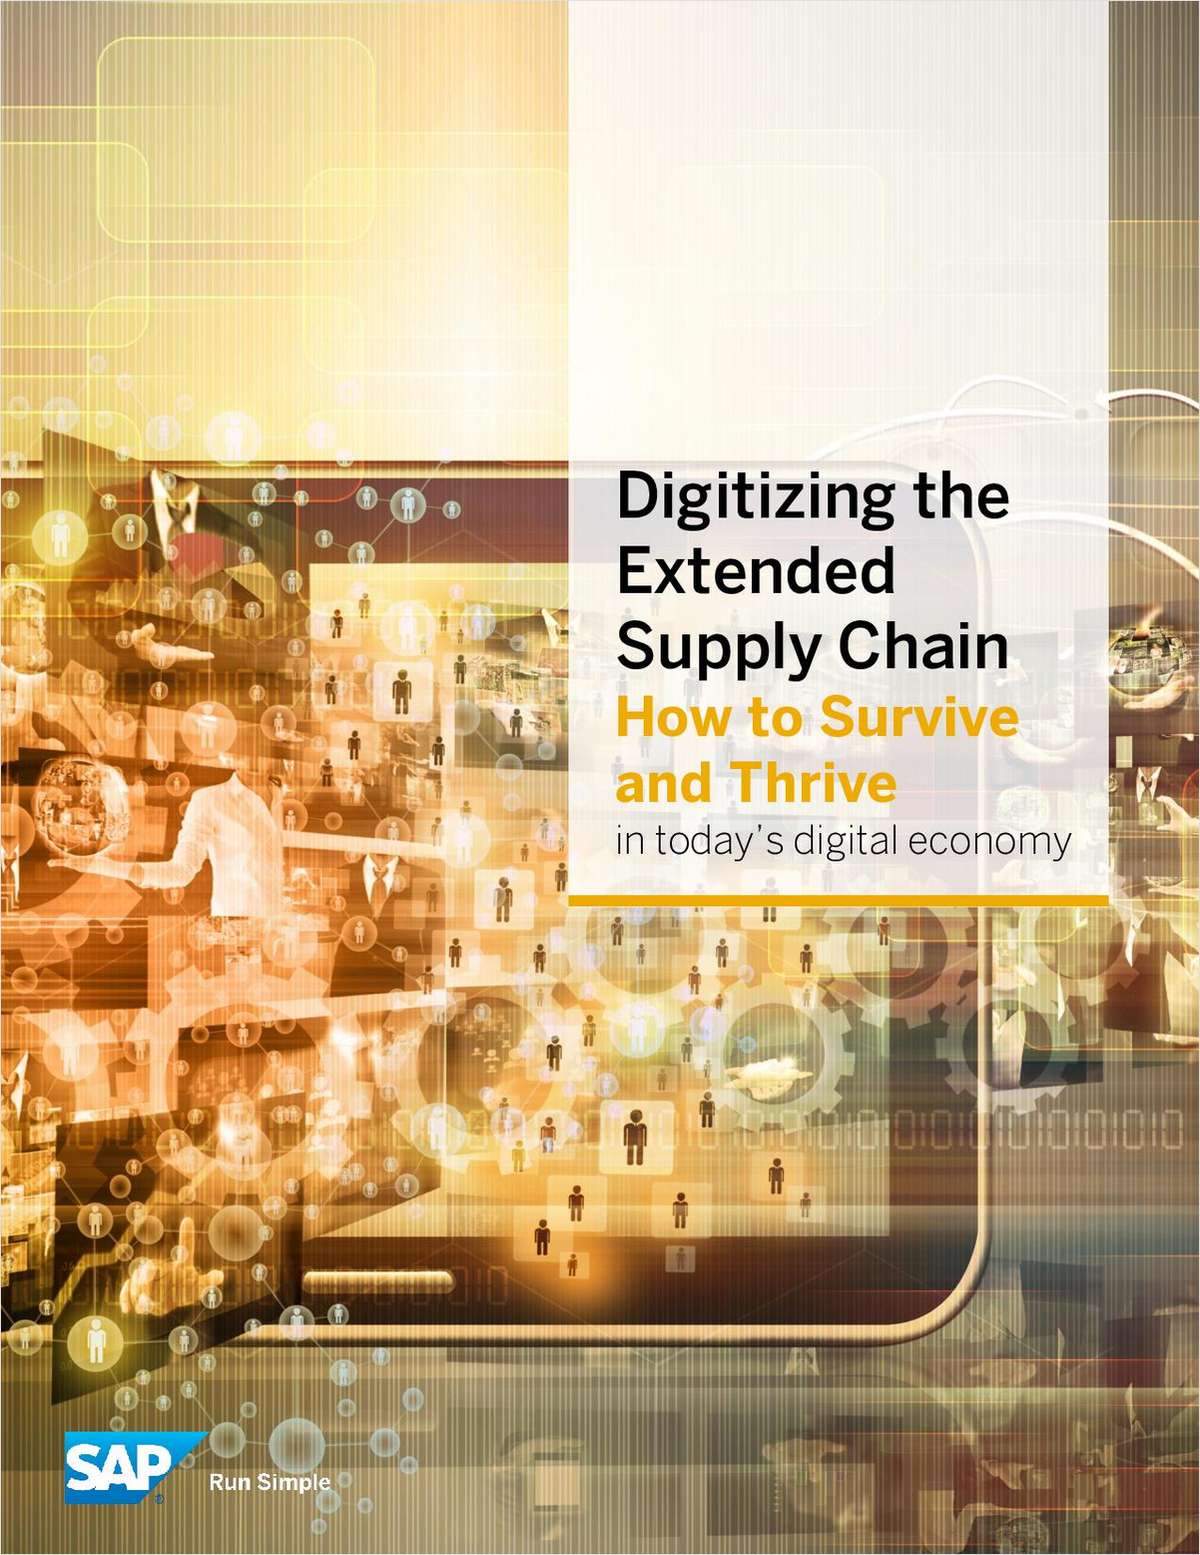 Digitizing the Extended Supply Chain: How to Survive and Thrive